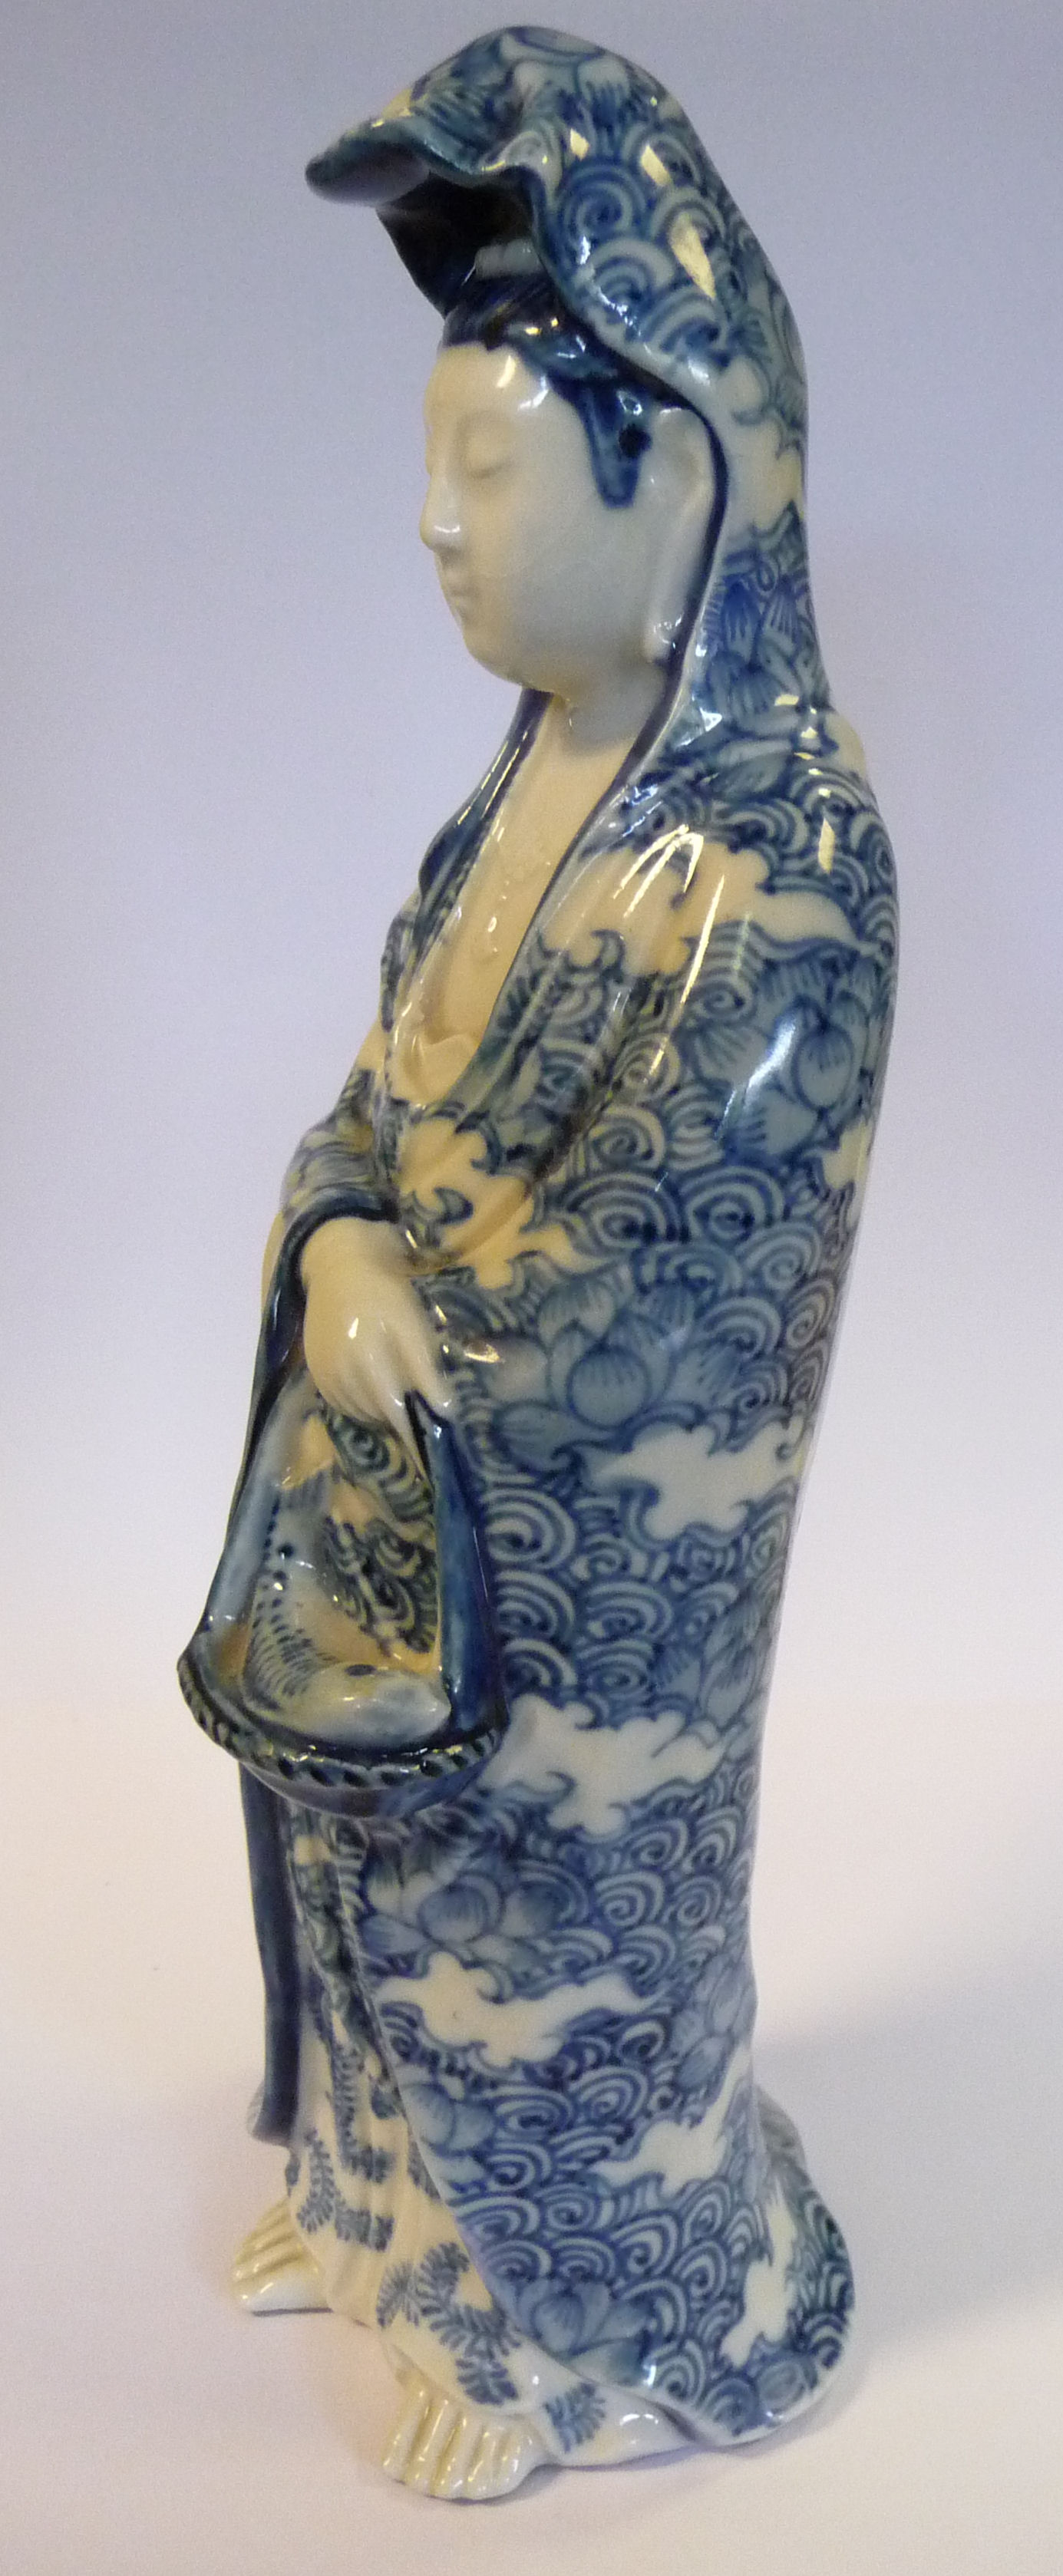 An early 20thC Chinese porcelain standing figure, Guan Yin, holding a basket of fish, - Image 4 of 11